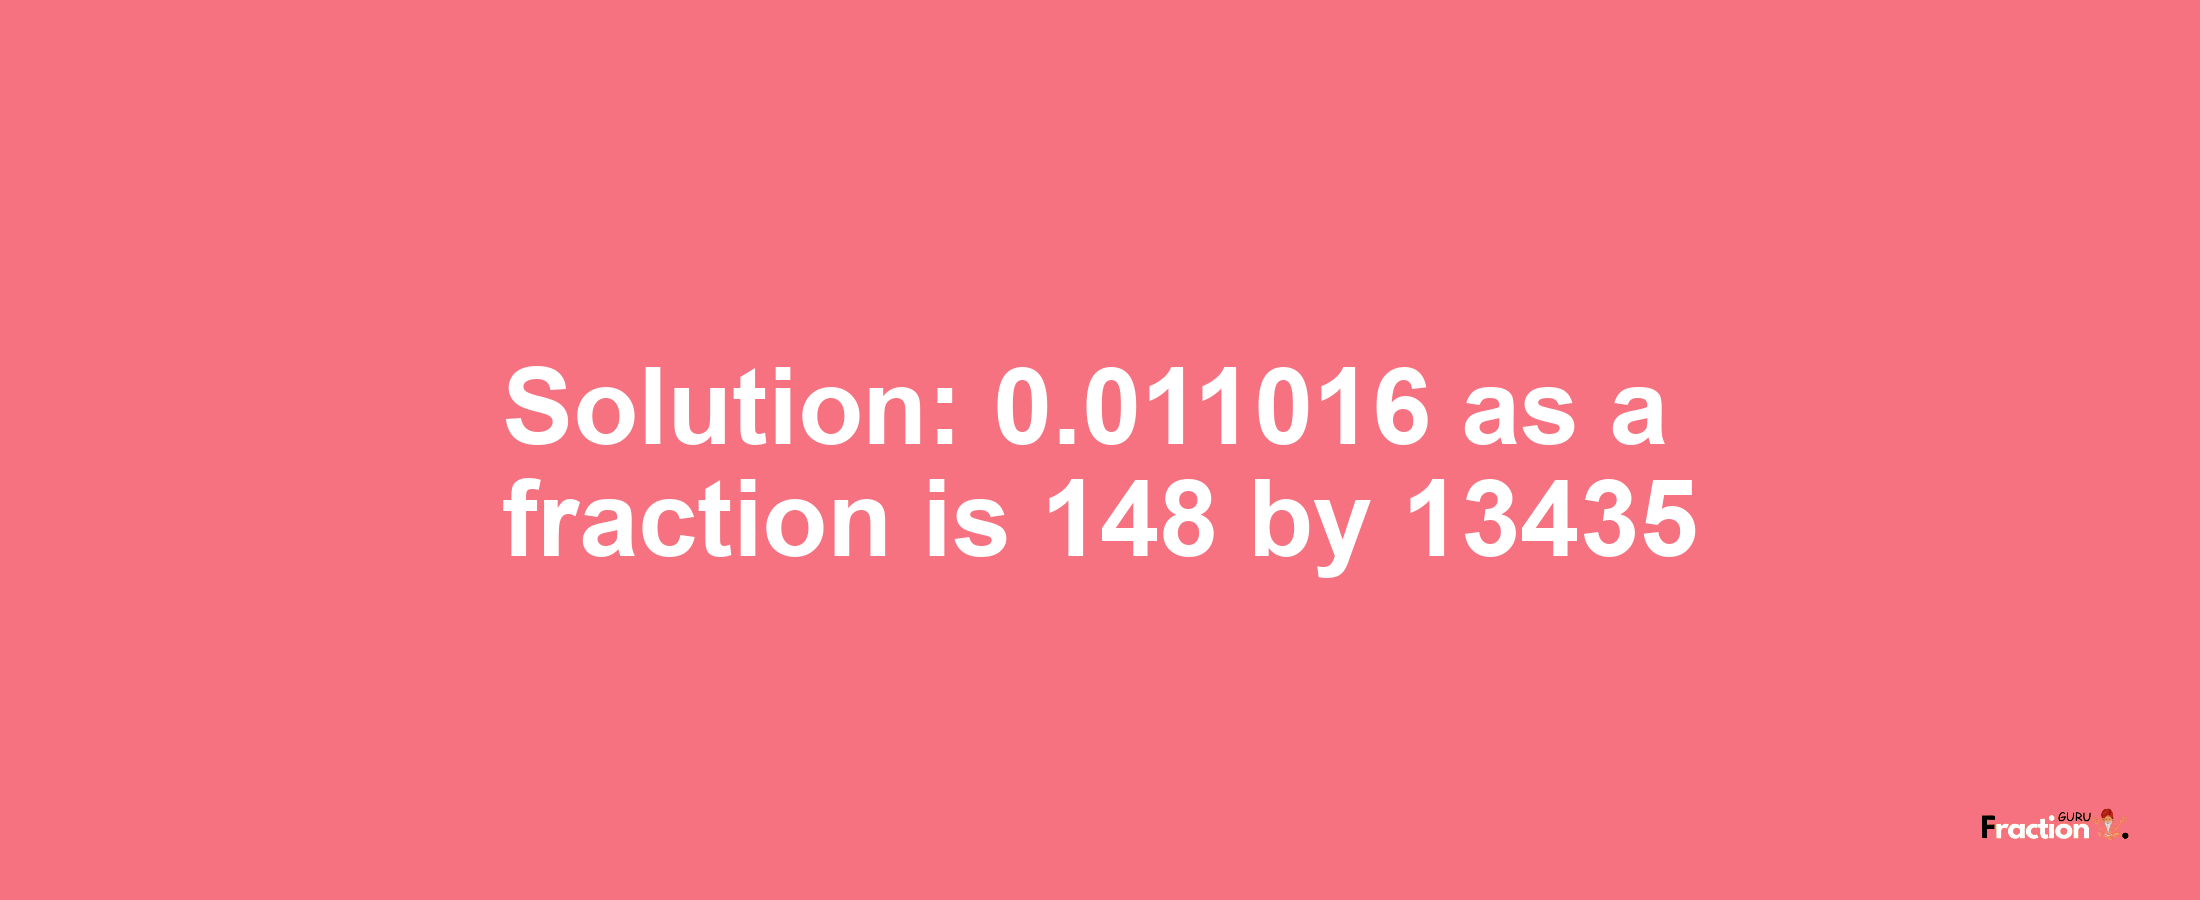 Solution:0.011016 as a fraction is 148/13435